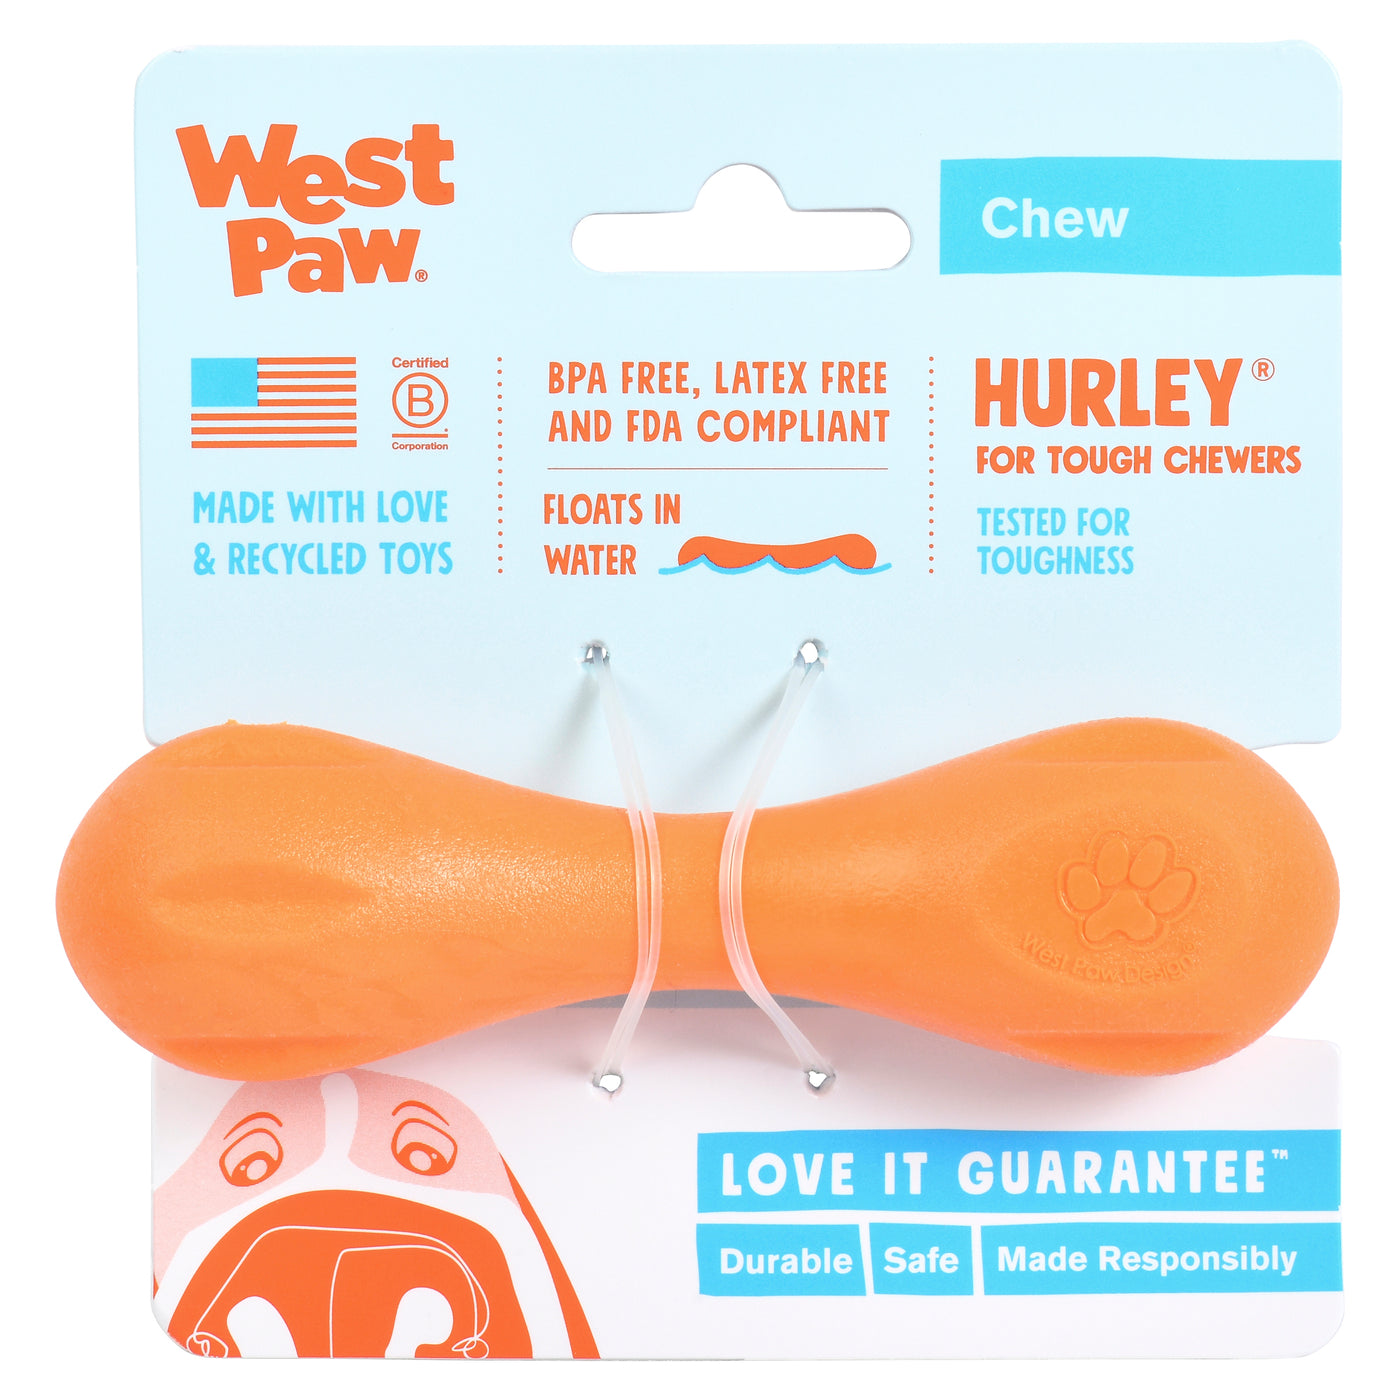 West Paw Hurley